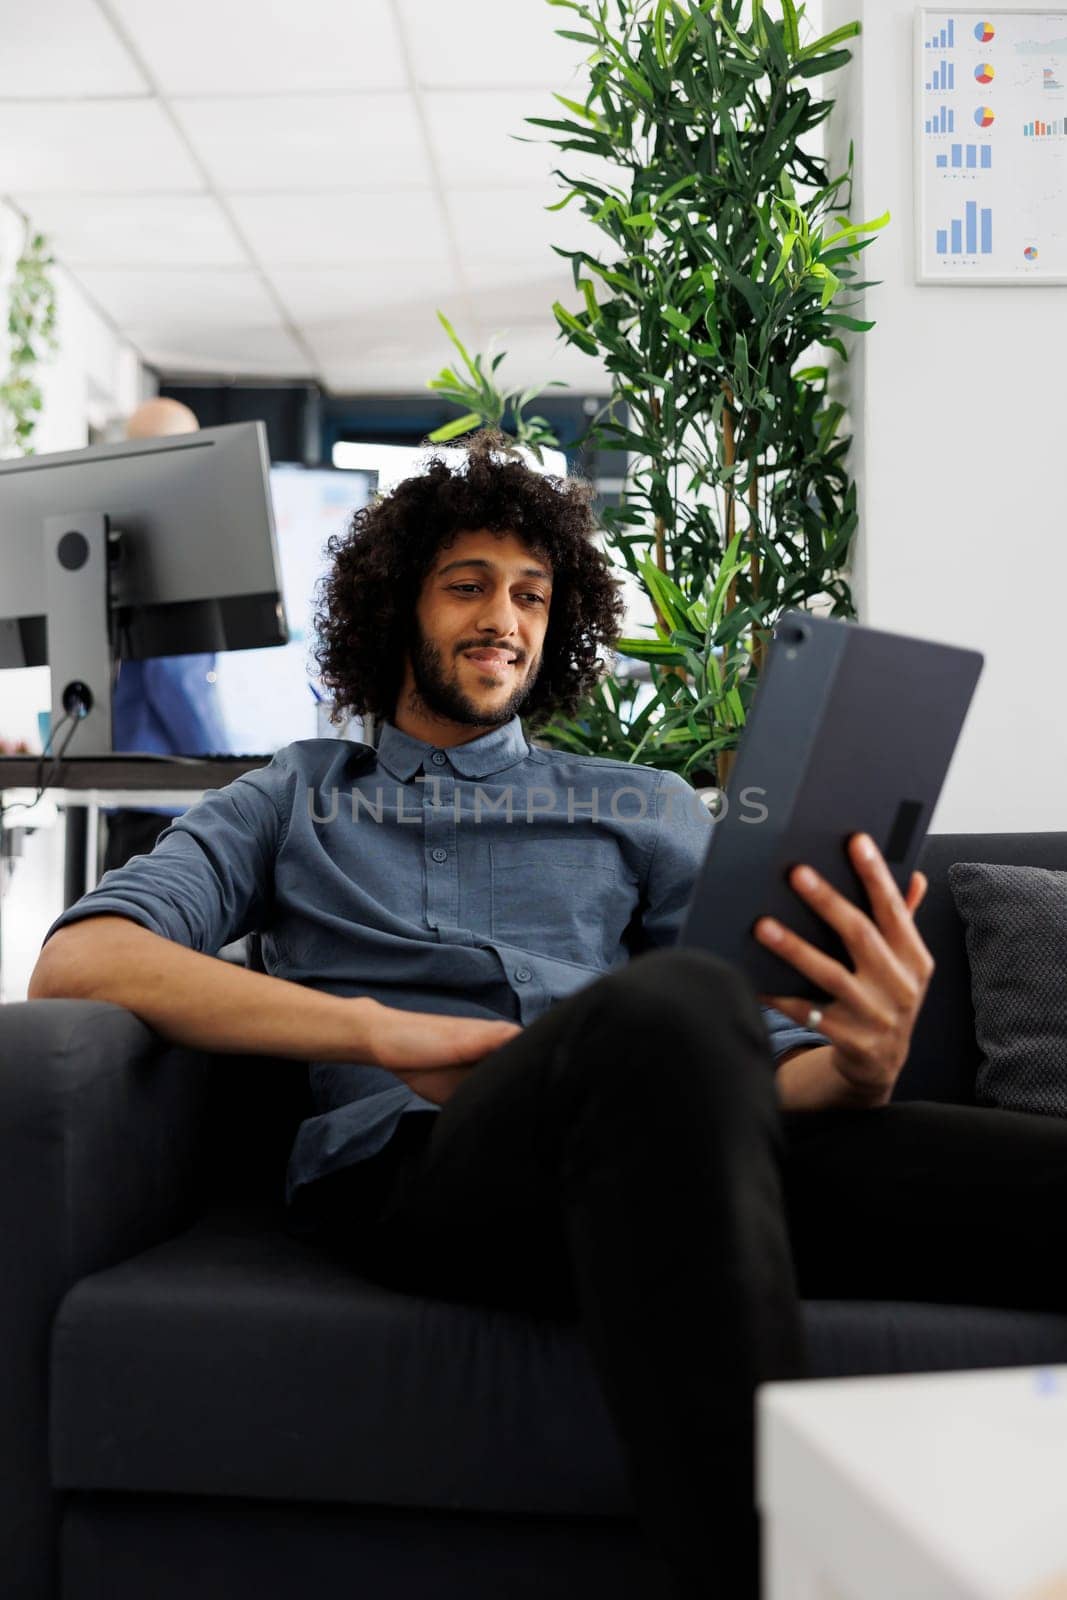 Arab business employee telecommuting, chatting in online meeting using digital tablet. Smiling relaxed start up entrepreneur videconferencing while sitting on couch in office